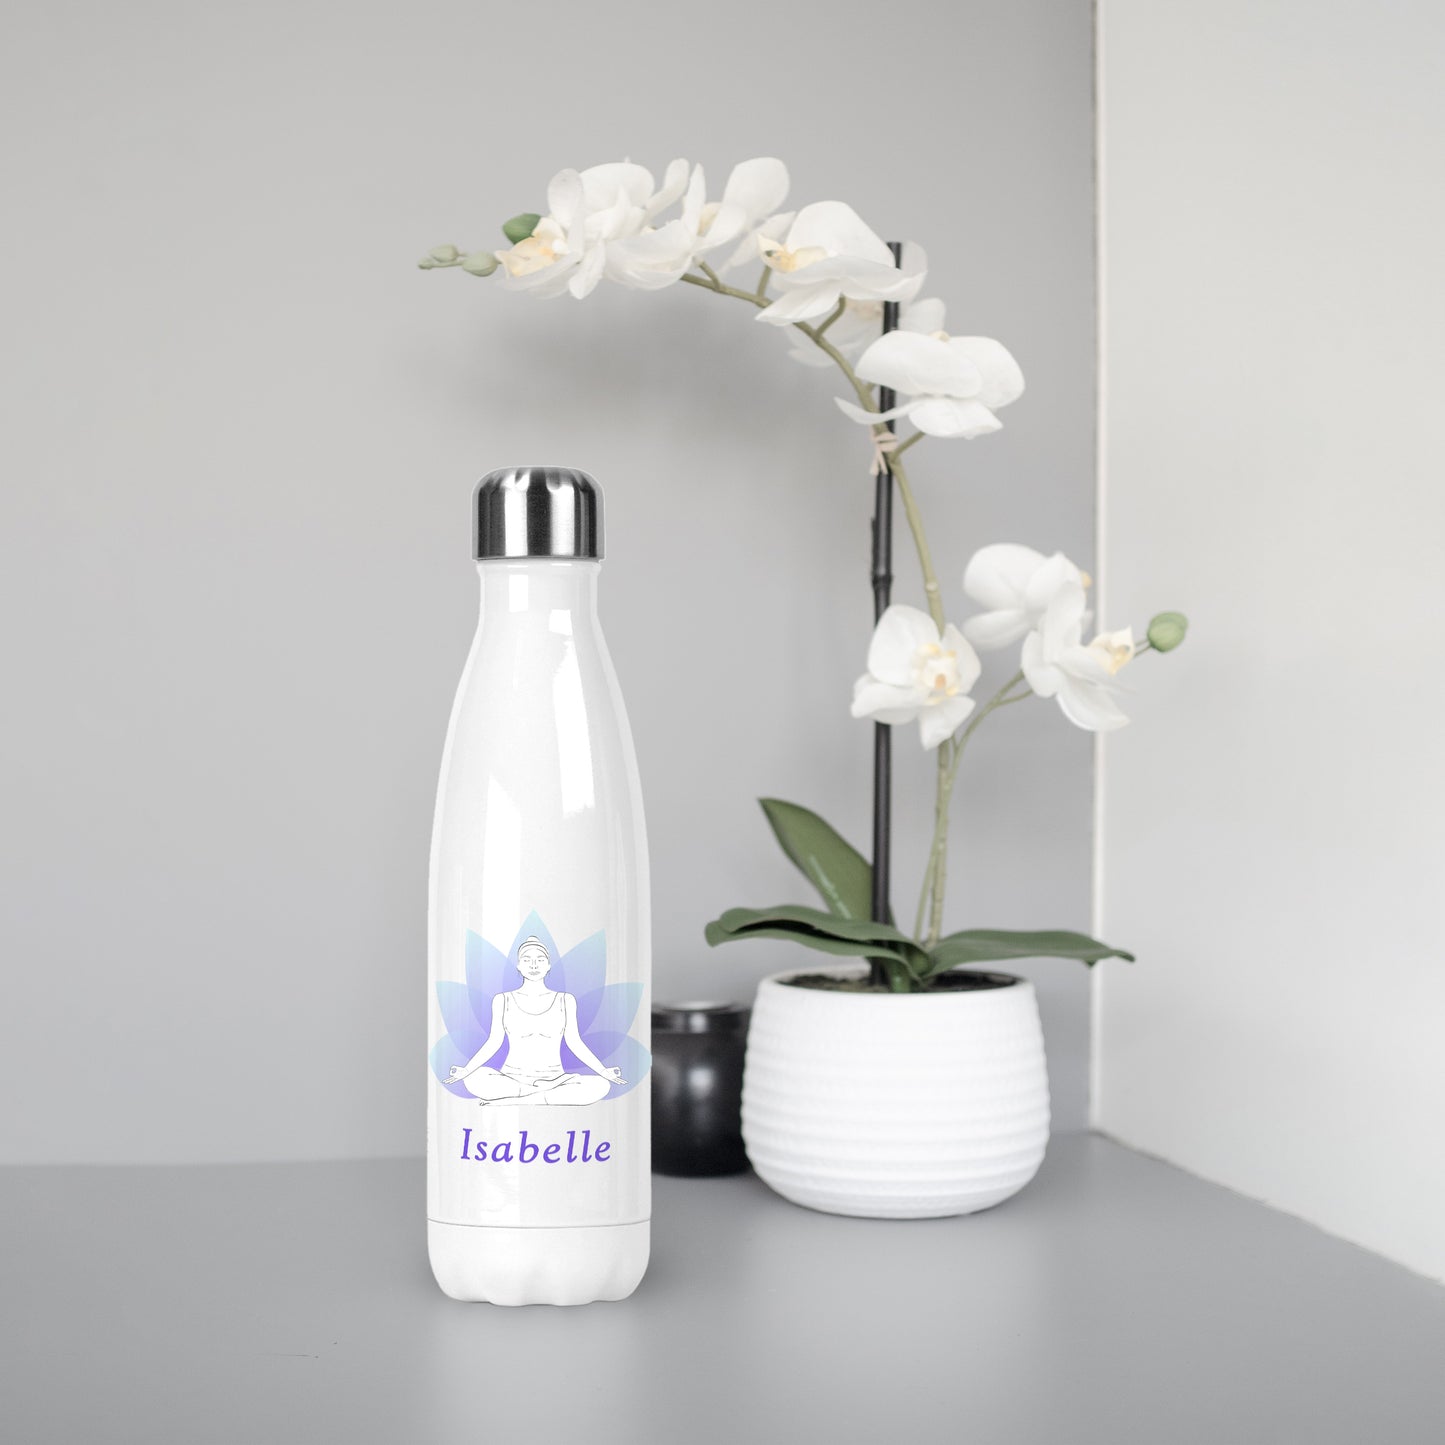 Personalised White 500ml reusable metal water bottle silver lid. Front design shown of two-tone blue and purple lotus flower. White outline woman in yoga meditation pose. Personalised purple font of name below. White orchid plant in background